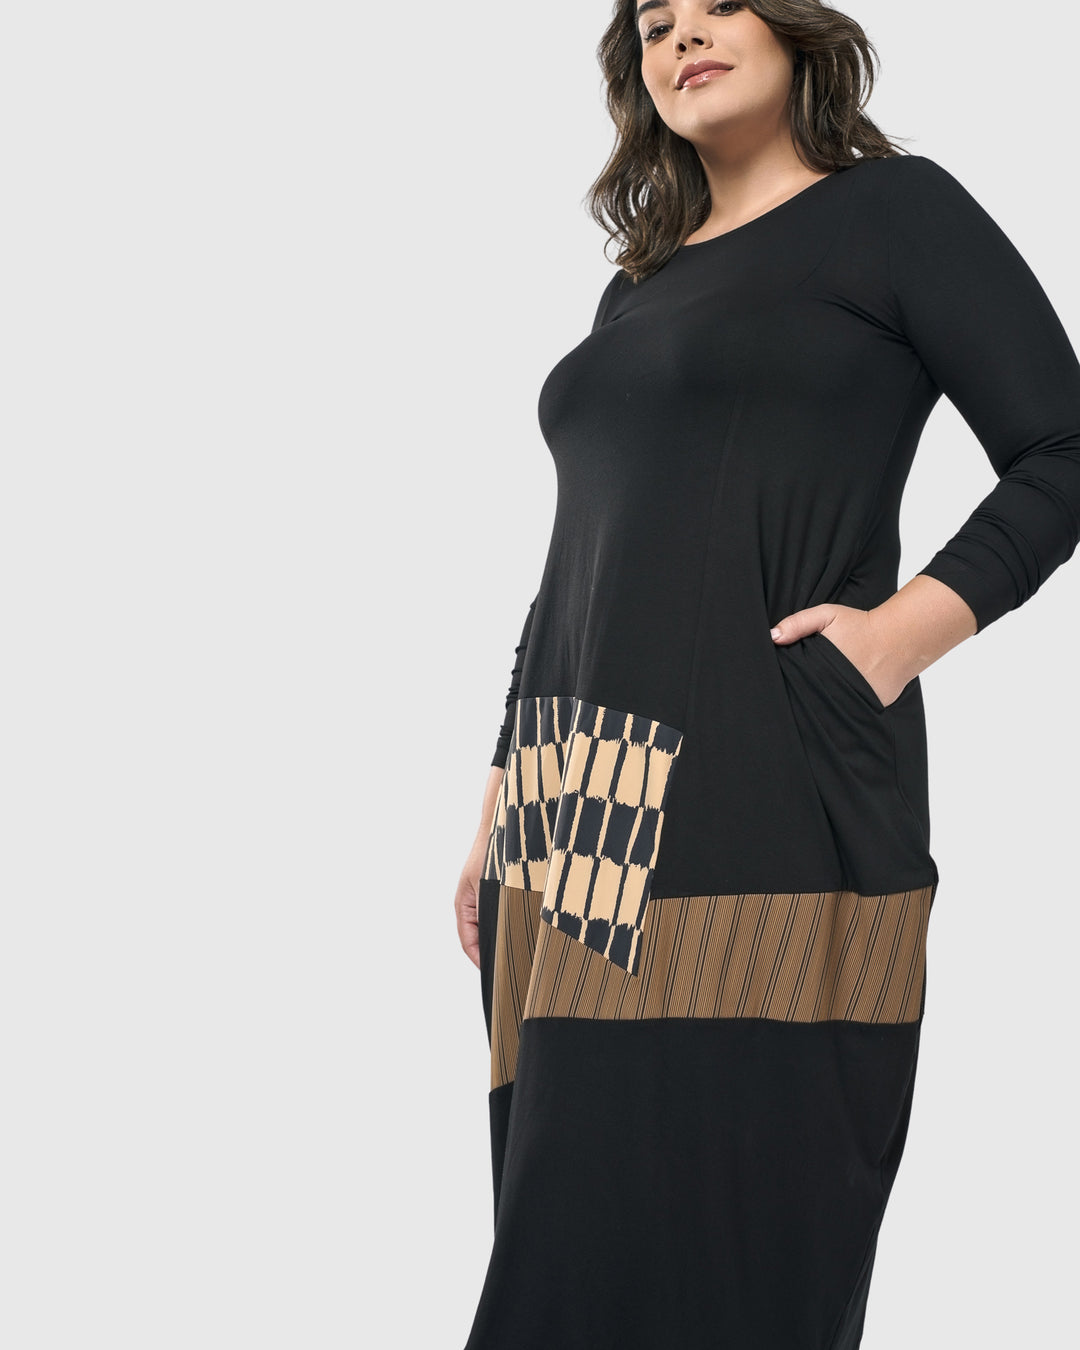 Sycamore Cocoon Dress, Coffee